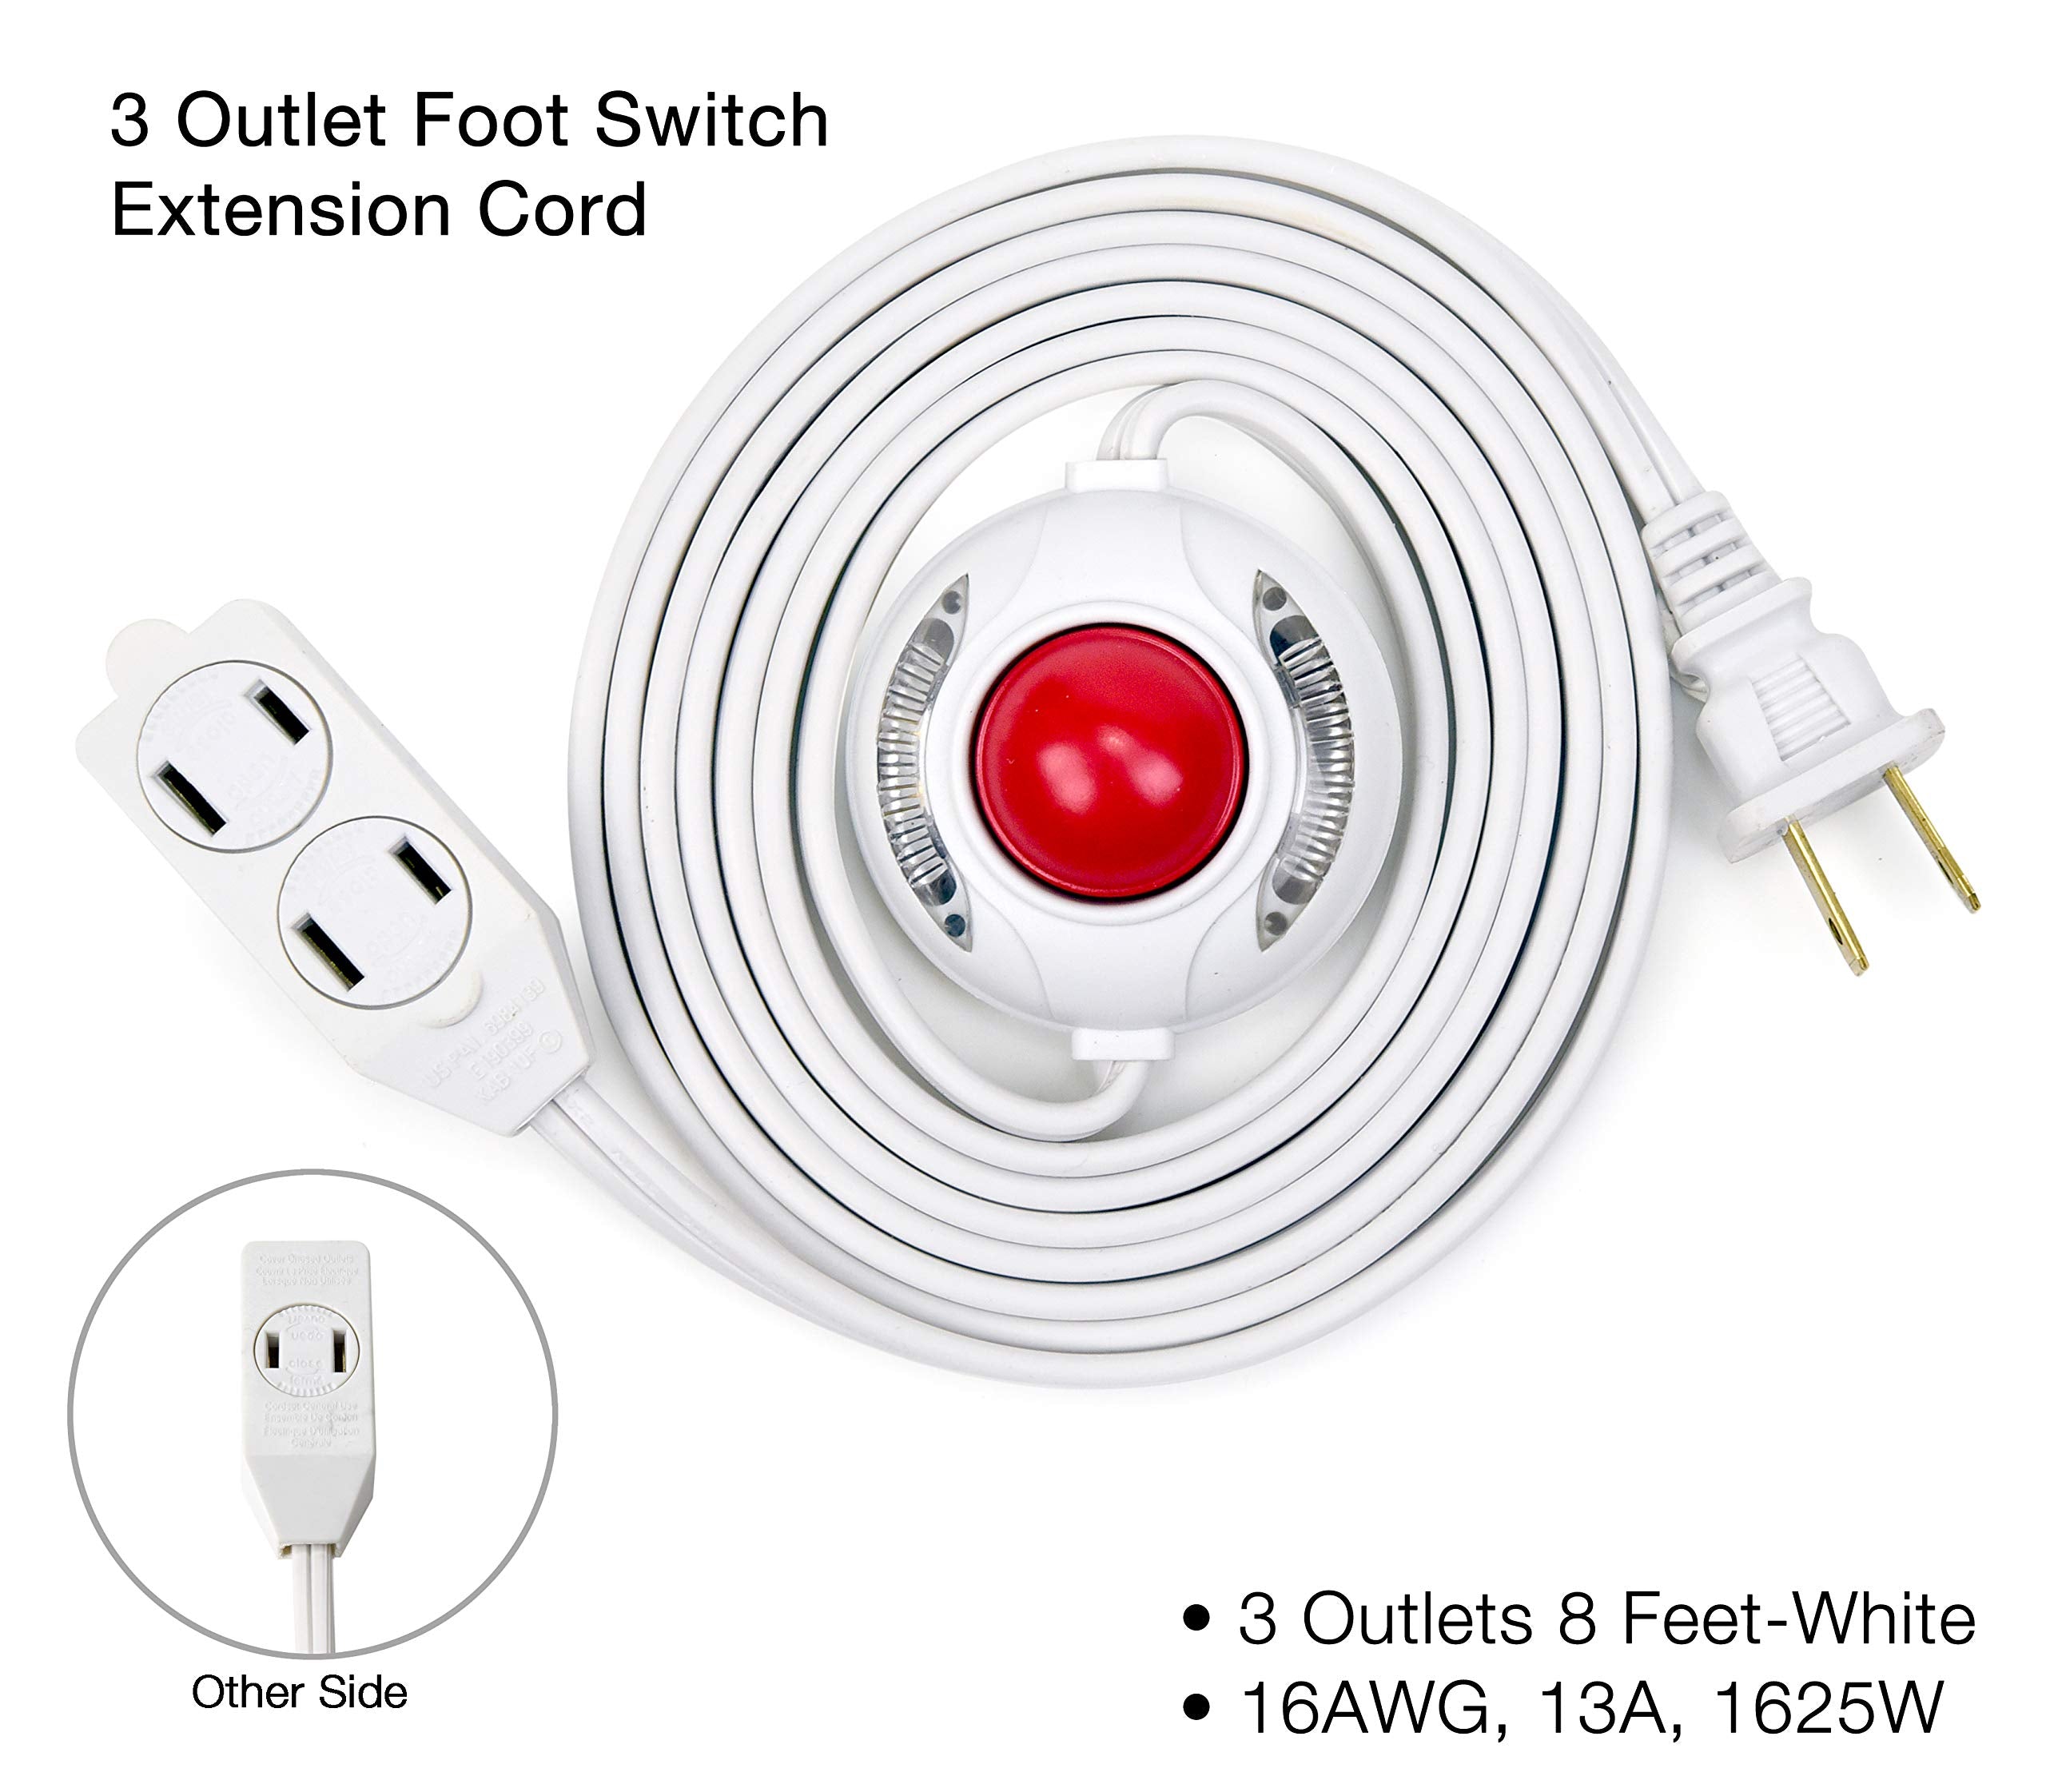 Electes 3 Outlet Extension Cord with Hand/Foot Switch and Light Indicator with Safety Twist-Lock, 16/2, Green, UL Listed  - Very Good